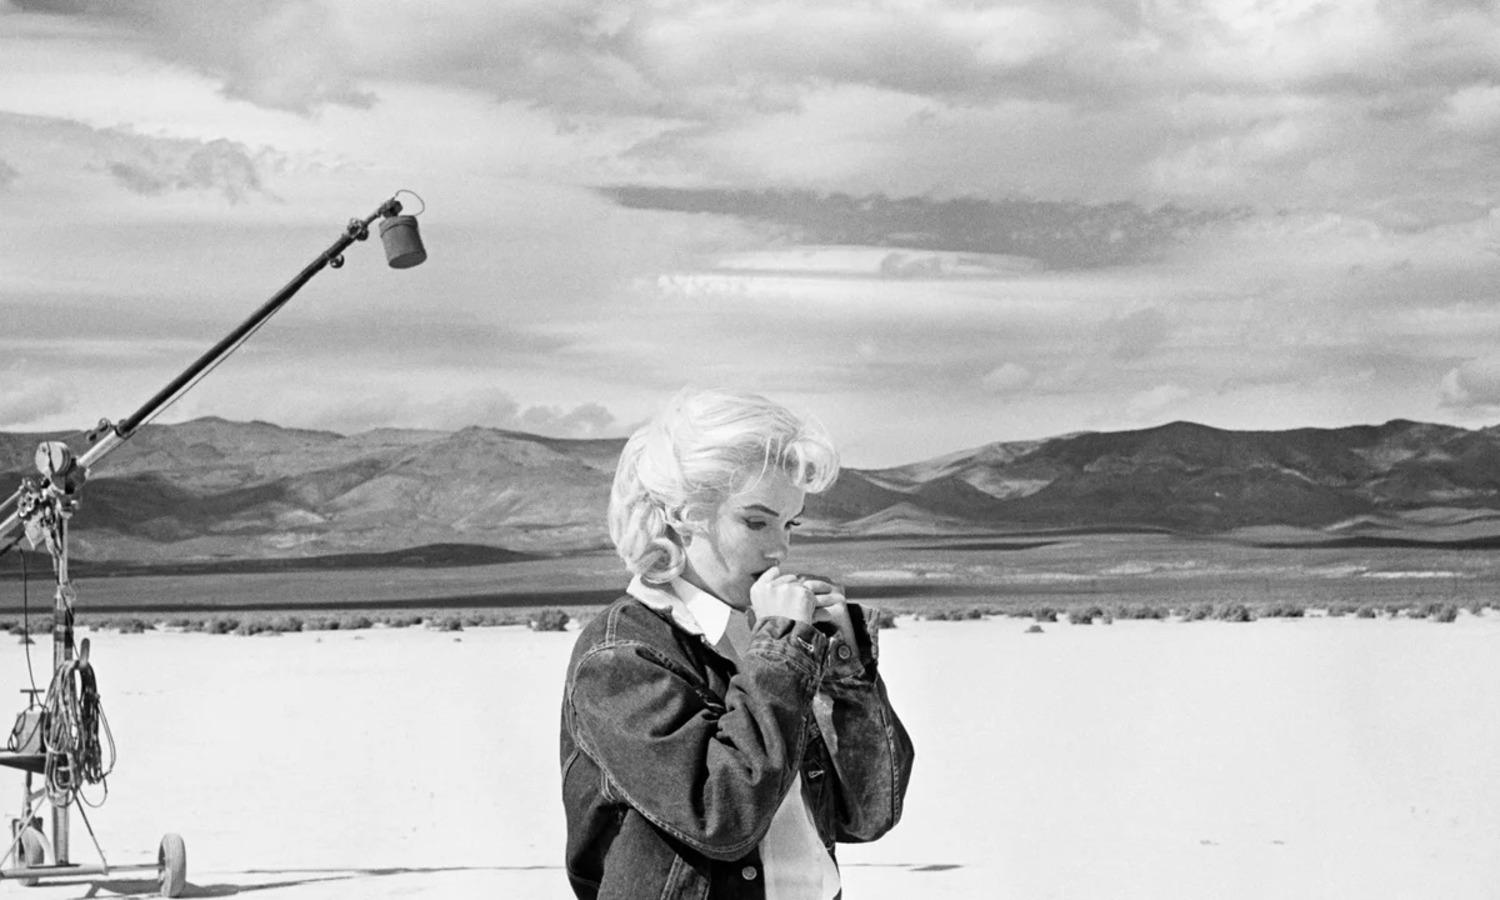 Marilyn Monroe on the set of ‘The Misfits’, Reno, Nevada, 1960.

All available sizes and editions:
20" x 24", Edition of 25 + 3 Artist Proofs
24" x 34", Edition of 25 + 3 Artist Proofs

"Eve Arnold, born in 1912 to Russian-immigrant parents in